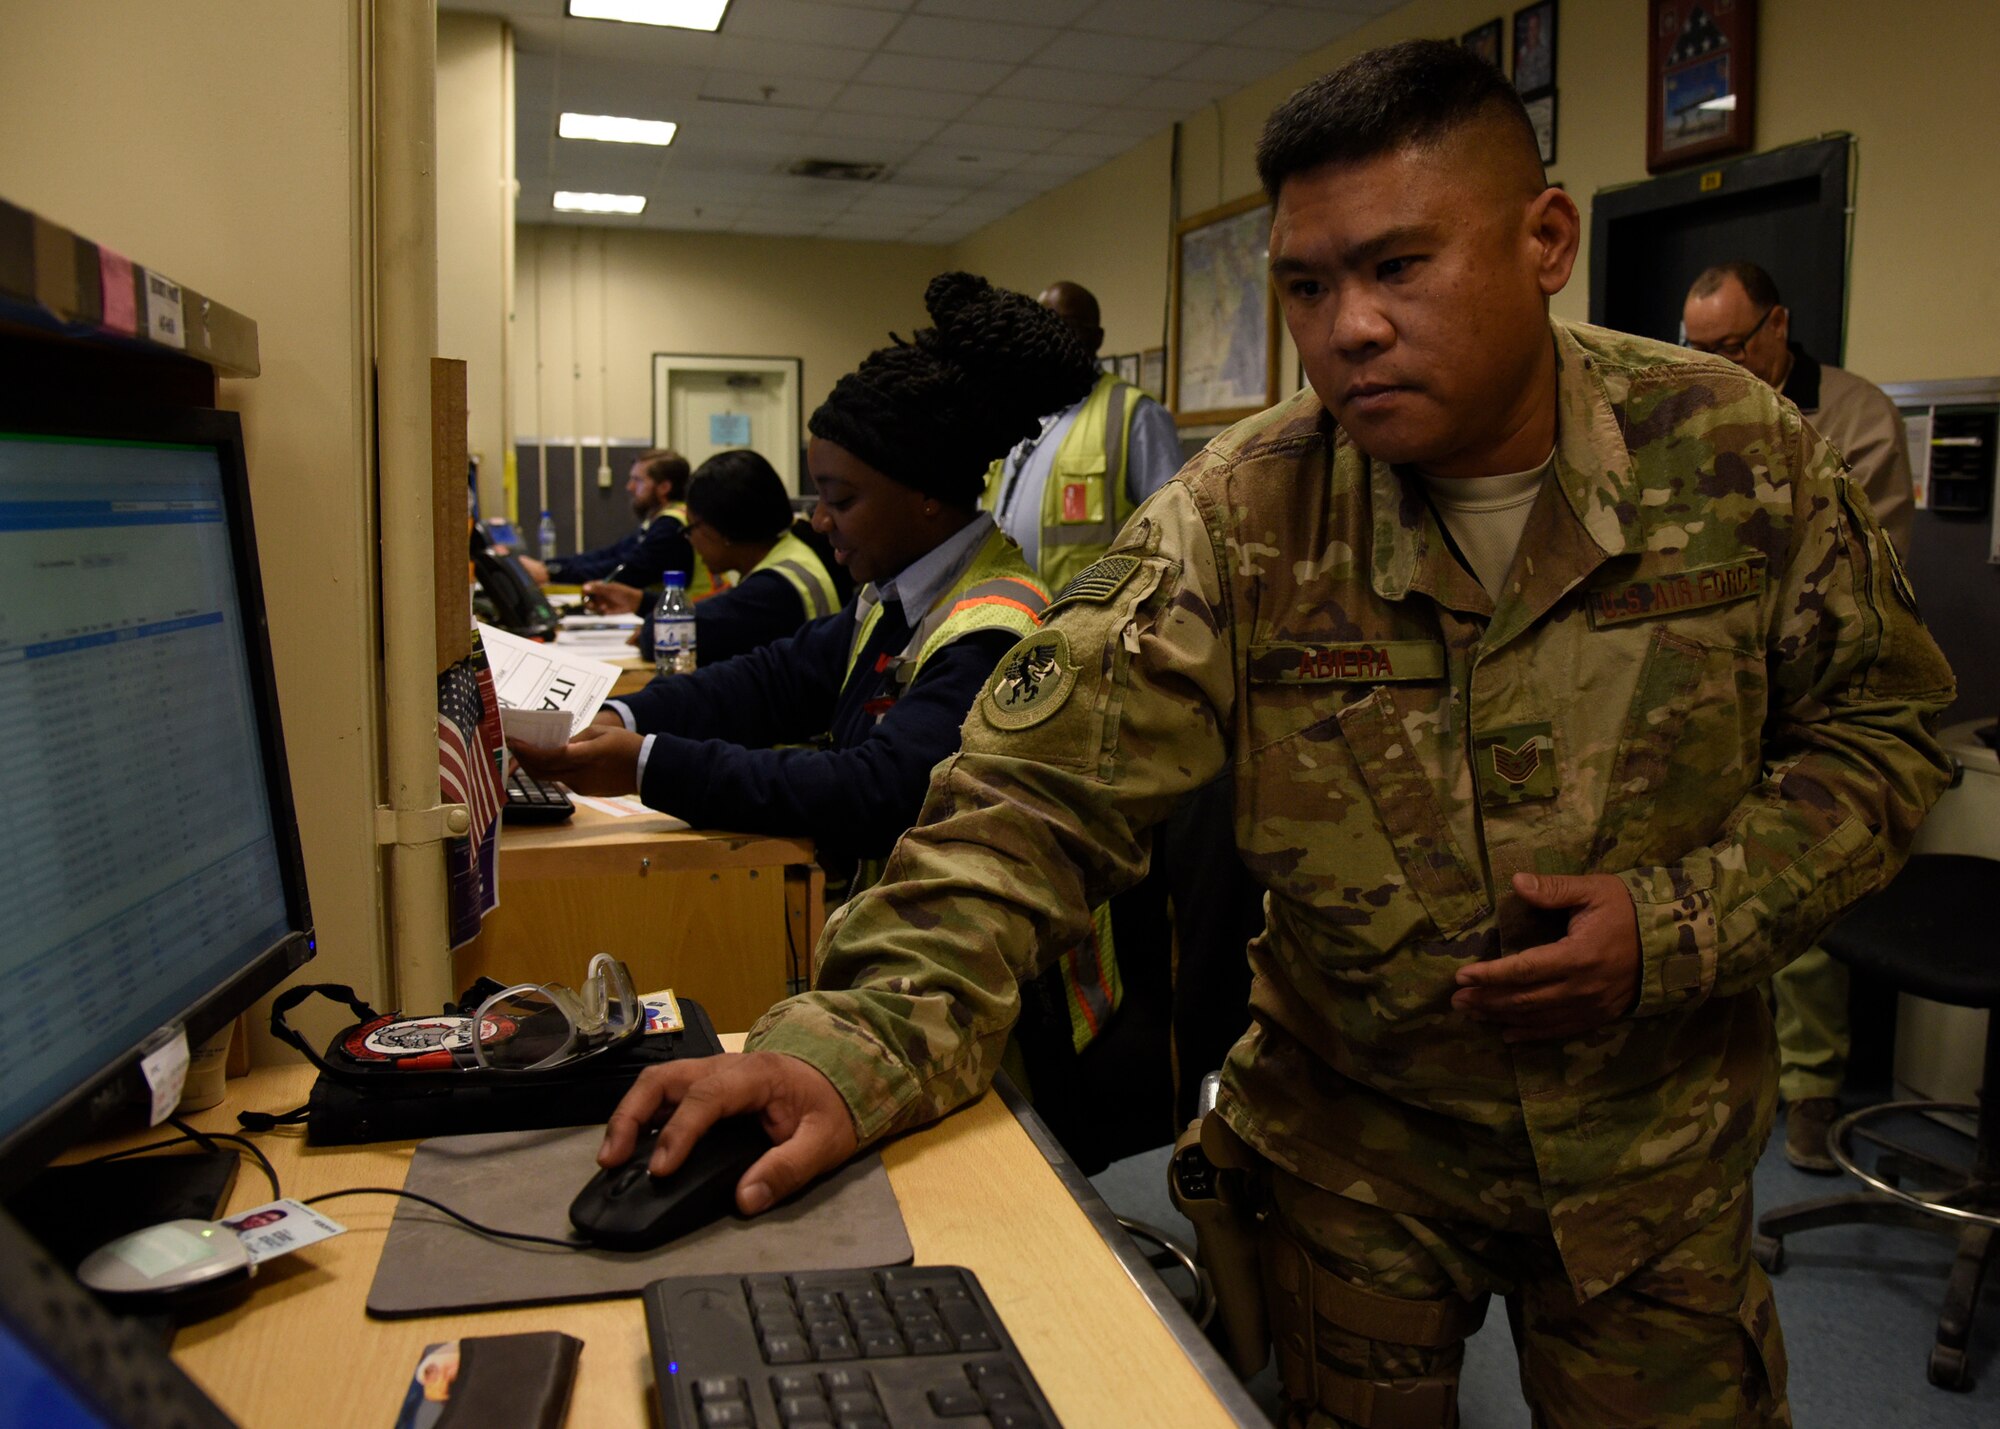 Tech. Sgt. Timothy Abiera, 455th Expeditionary Logistics Readiness Squadron contracting officer representative, demonstrates how the new process of checking in passengers at the passenger terminal will work Jan. 19, 2018 at Bagram Airfield, Afghanistan.